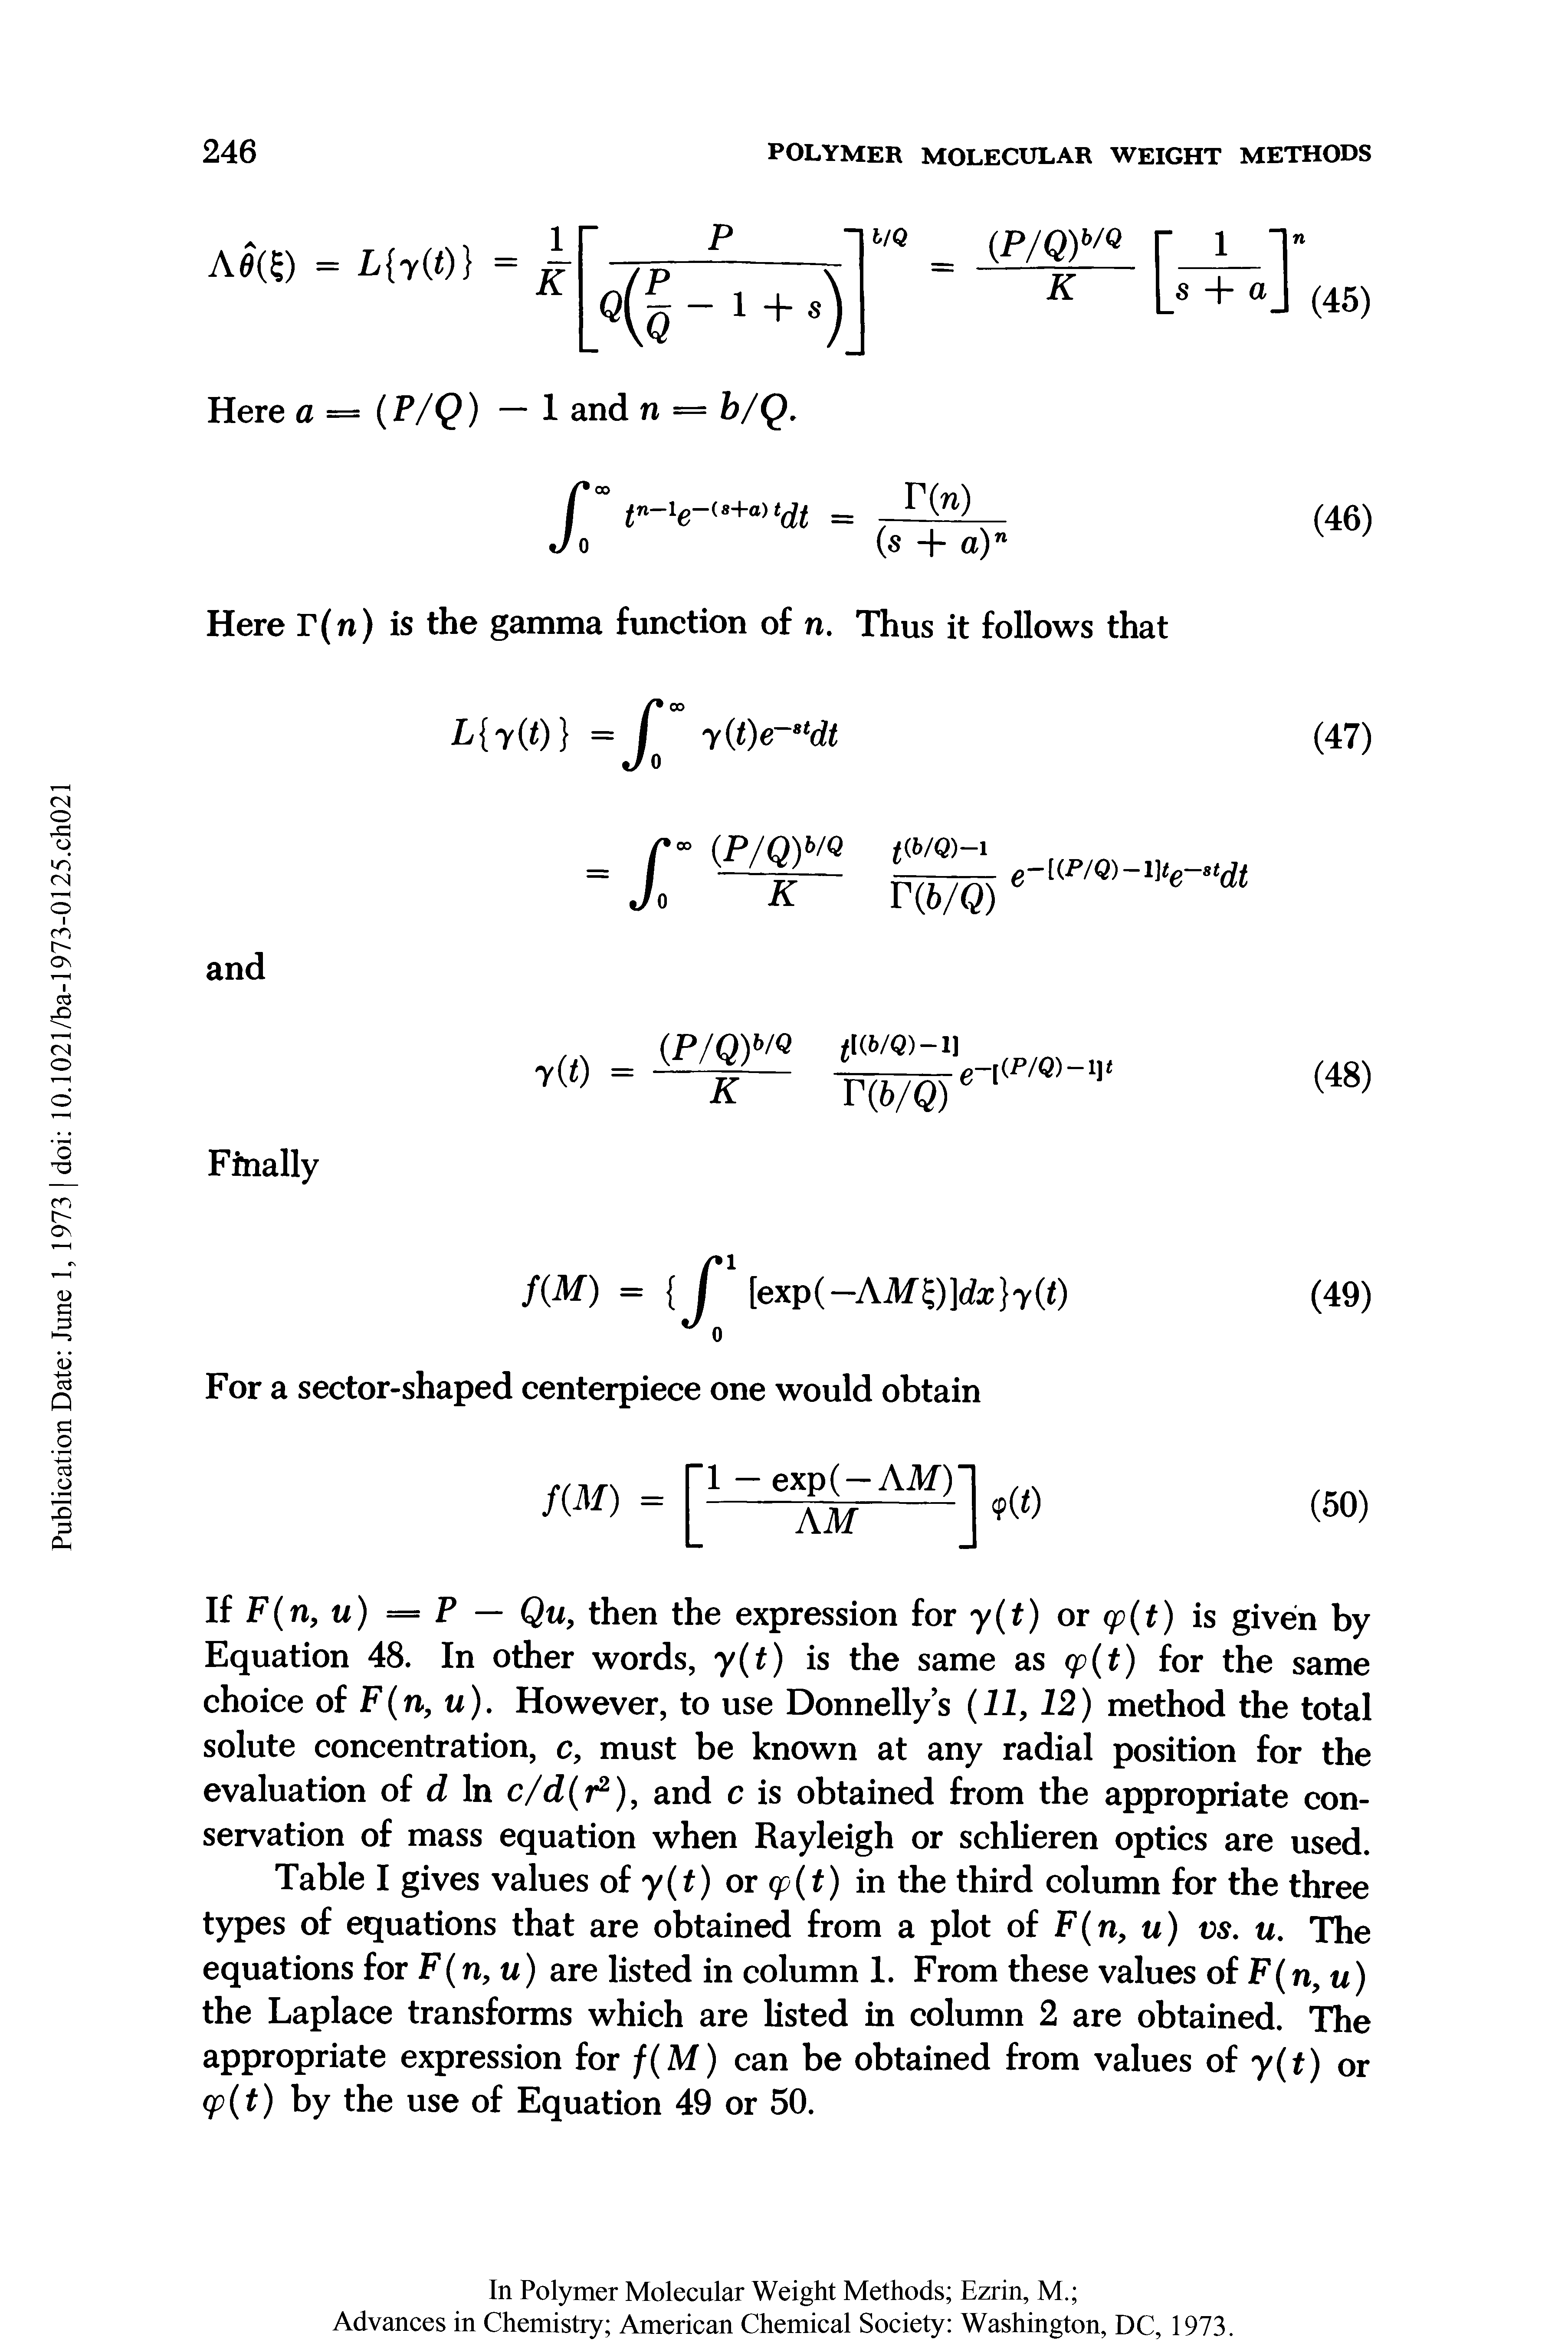 Table I gives values of y(t) or 99(f) in the third column for the three types of equations that are obtained from a plot of F(n, u) vs. u. The equations for F (n, u) are listed in column 1. From these values of F( n, u) the Laplace transforms which are listed in column 2 are obtained. The appropriate expression for f(M) can be obtained from values of y(t) or 99(f) by the use of Equation 49 or 50.